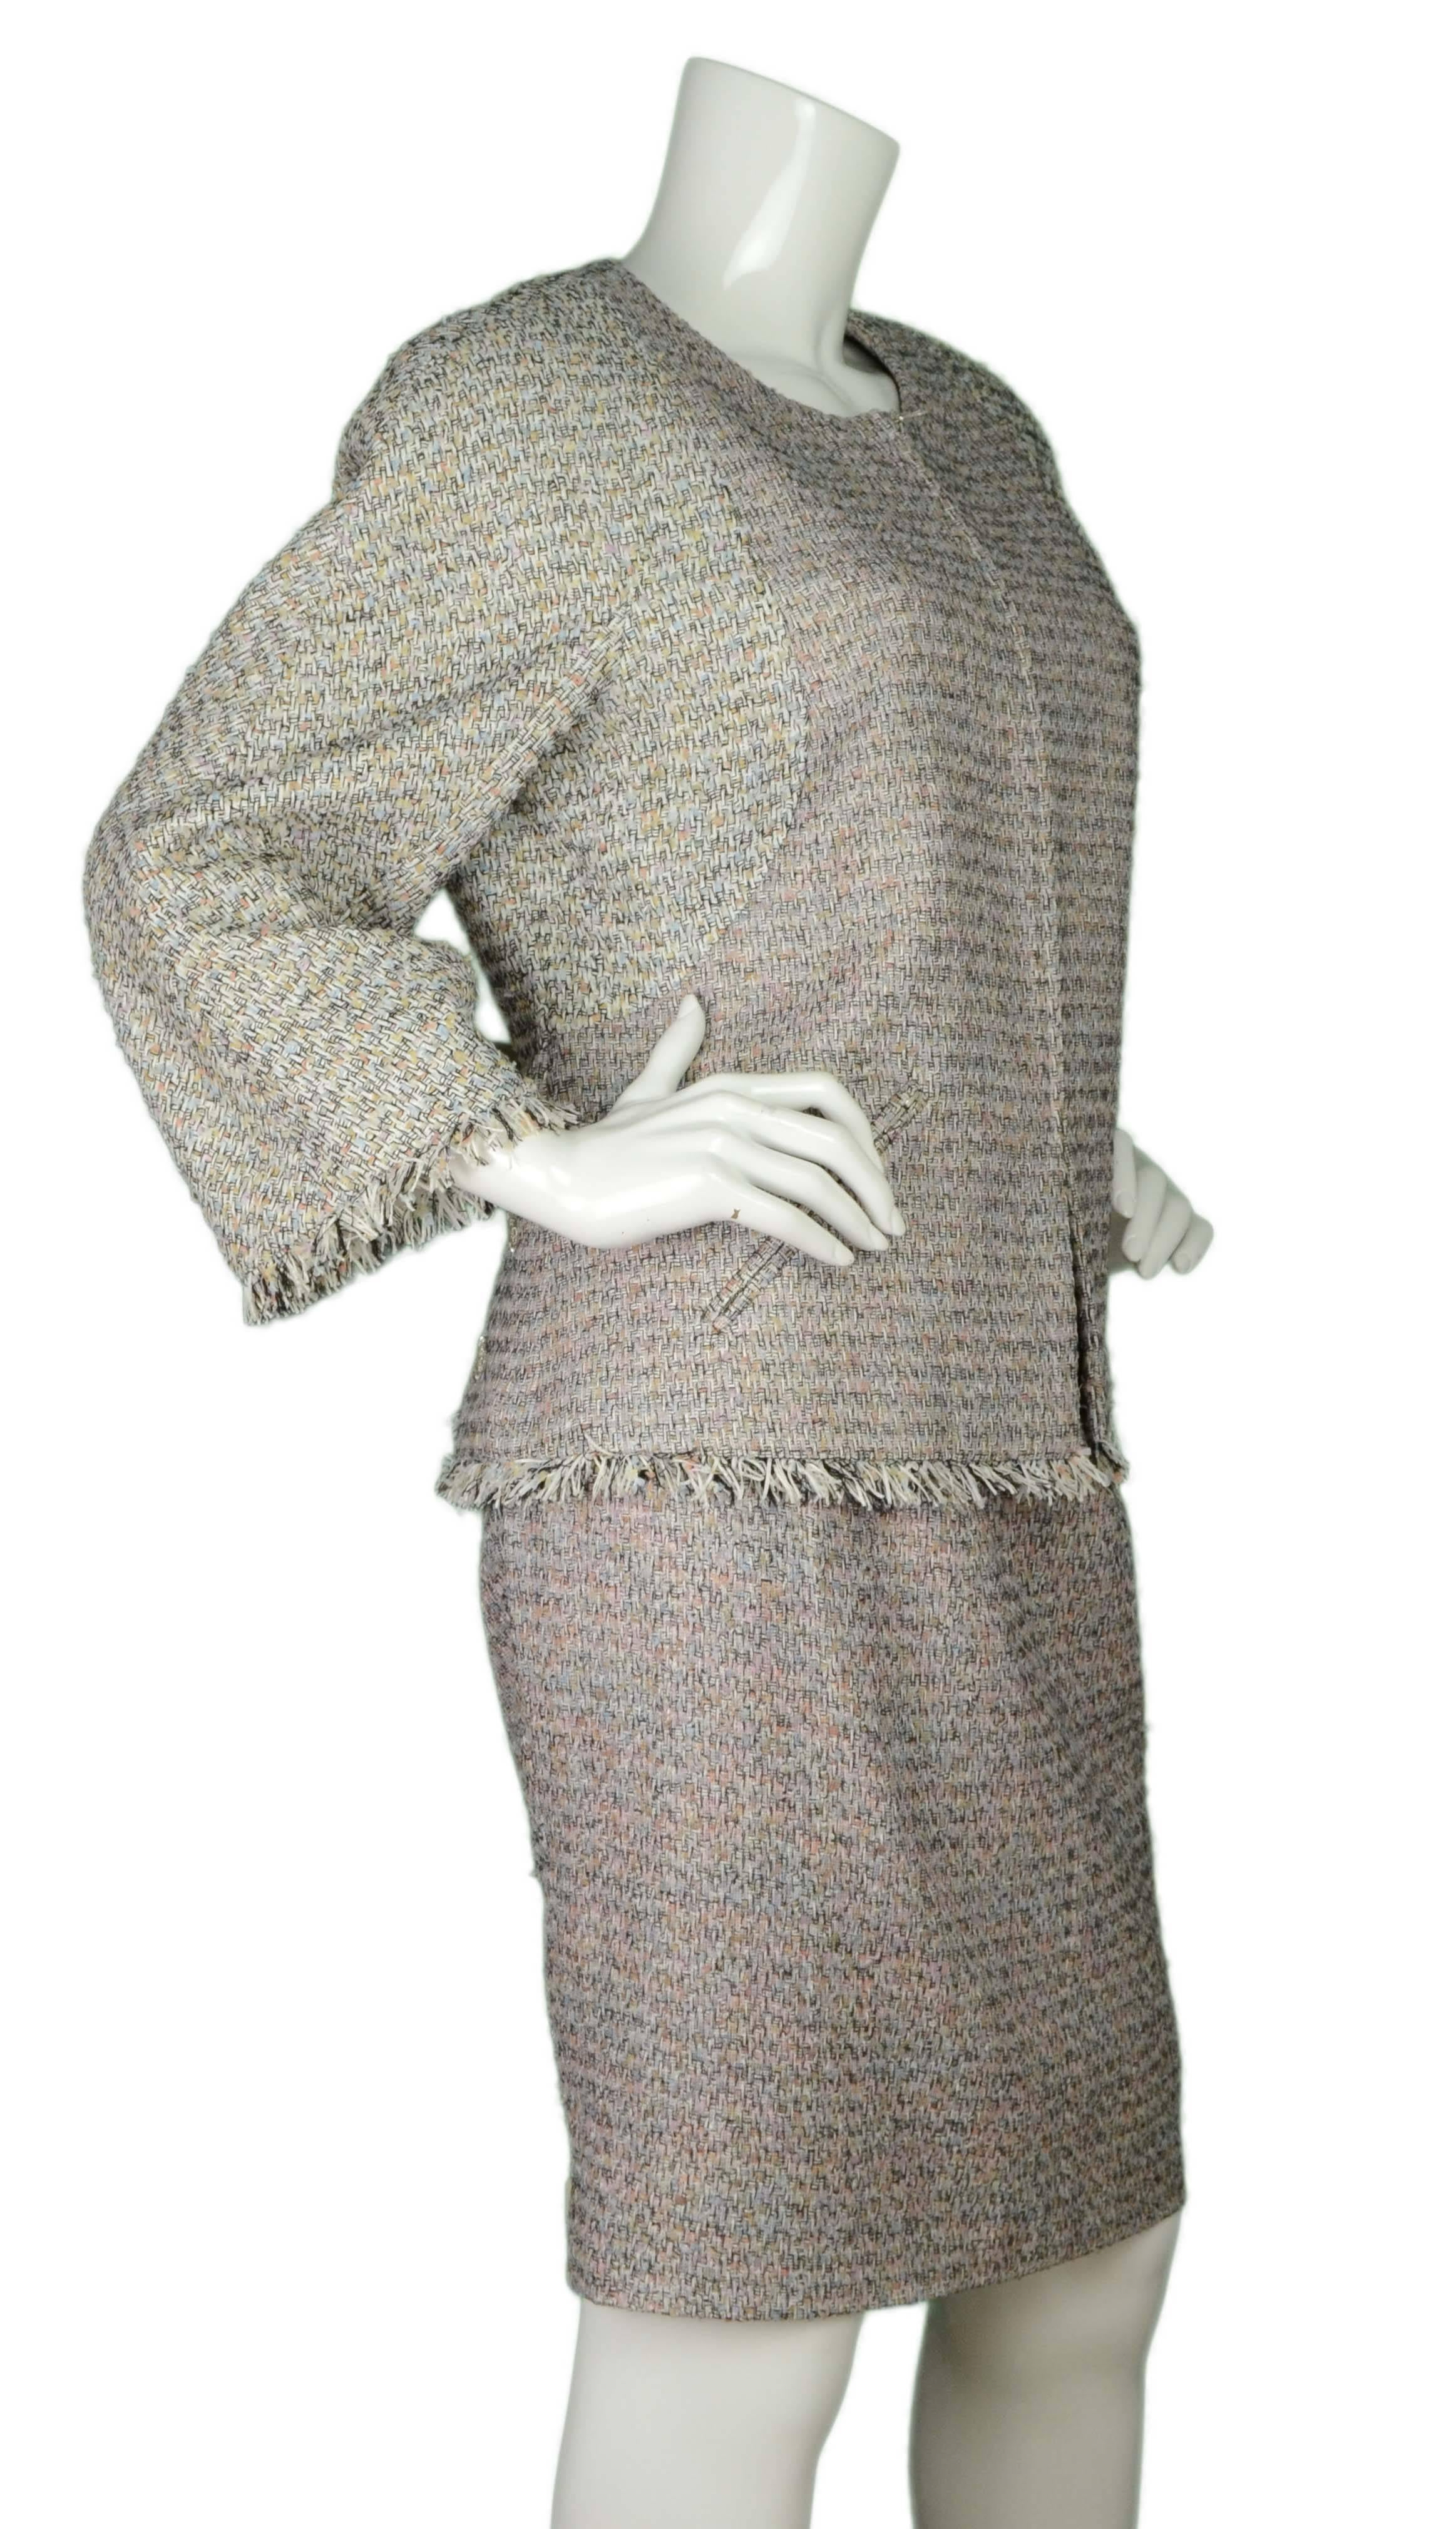 Chanel Multi-Colored Tweed Skirt Suit 
Features raw fringe at hemline of jacket sleeves and bottom of jacket
Made In: France
Color: Black, white, pale pink, pale blue, pale yellow
Composition: 62% cotton, 33% nylon, 5% rayon
Lining: White, 100%